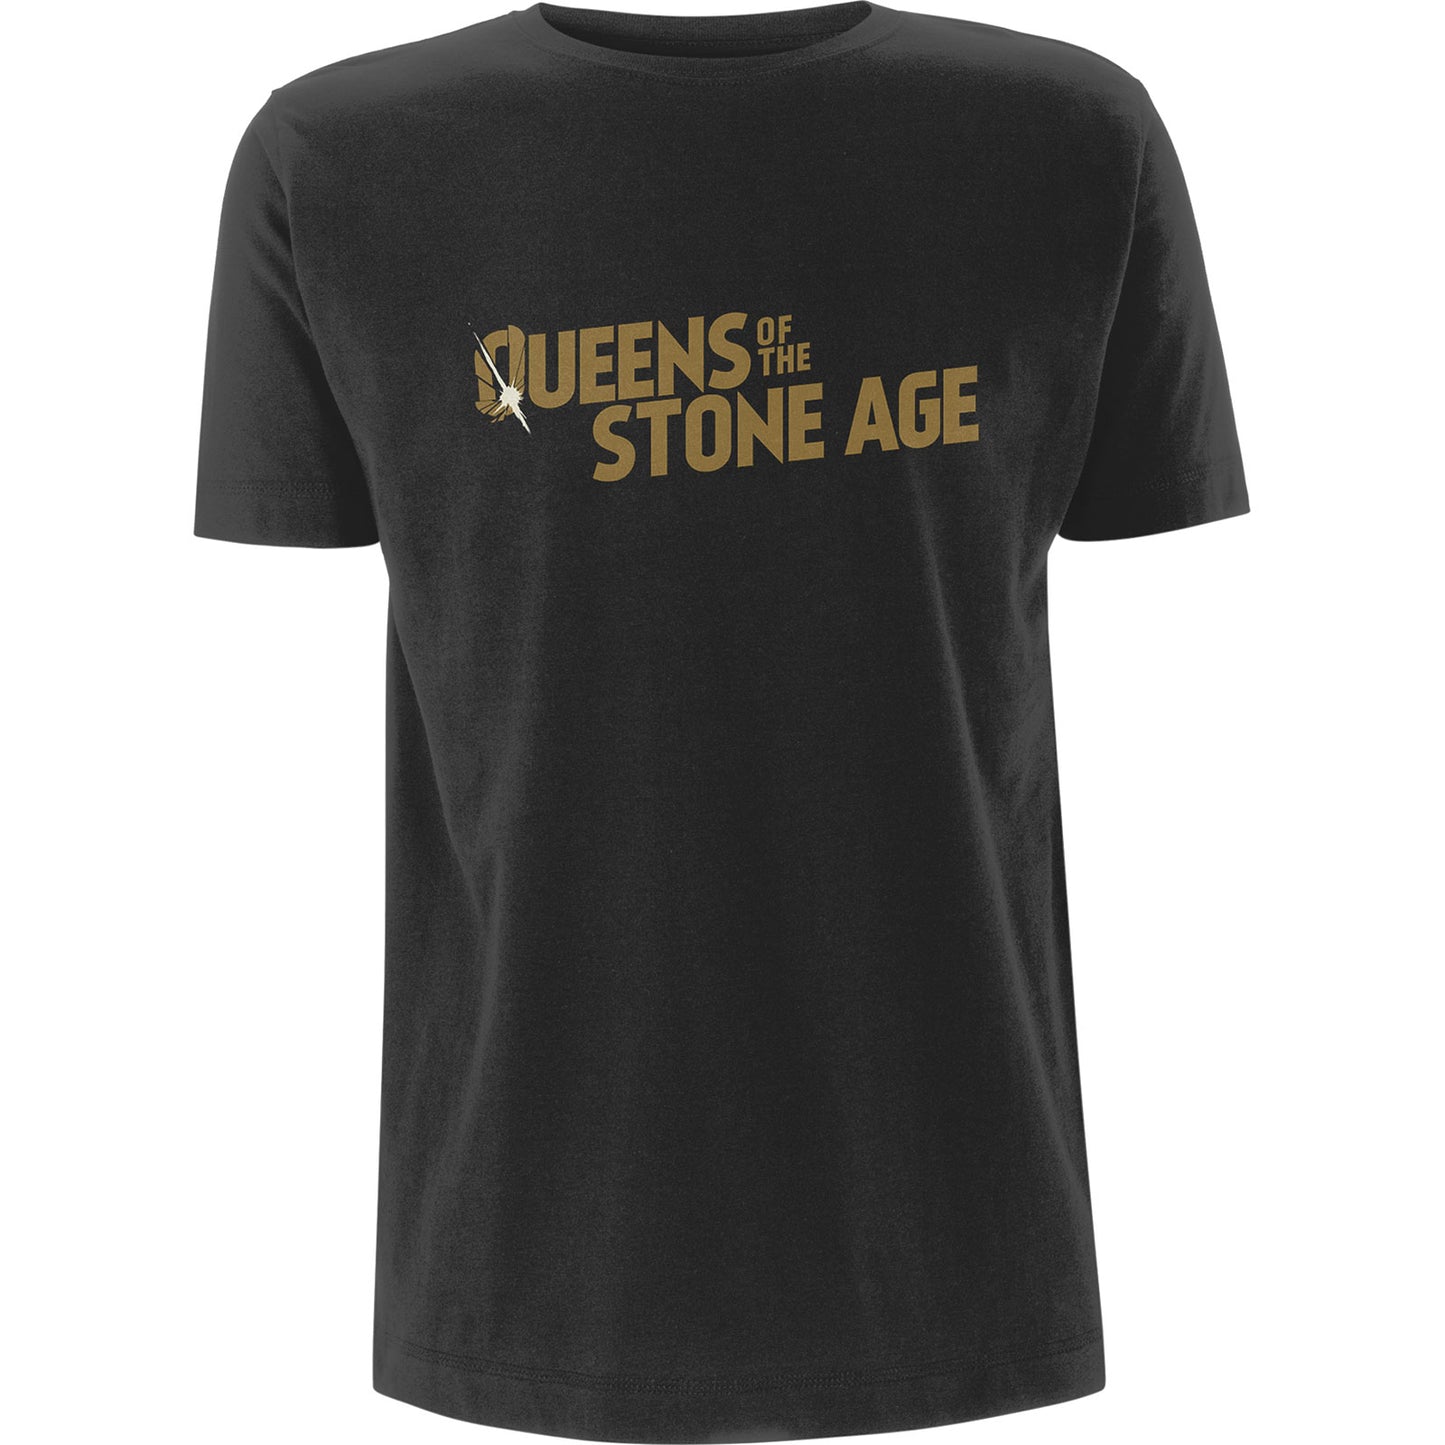 QUEENS OF THE STONE AGE UNISEX T-SHIRT: METALLIC TEXT LOGO